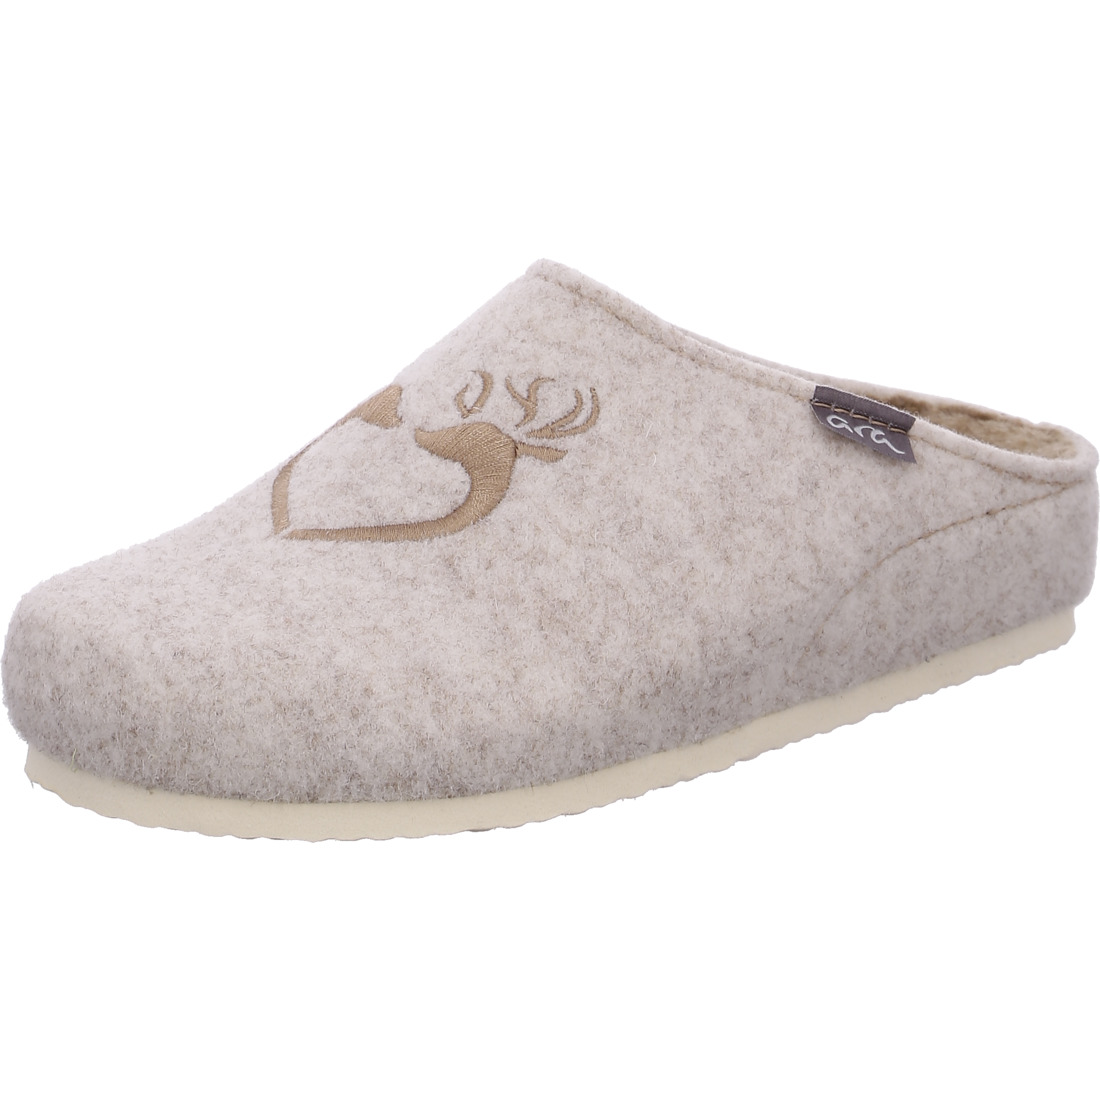 Chaussons*Ara Shoes Chaussons Chaussons Cosy creme